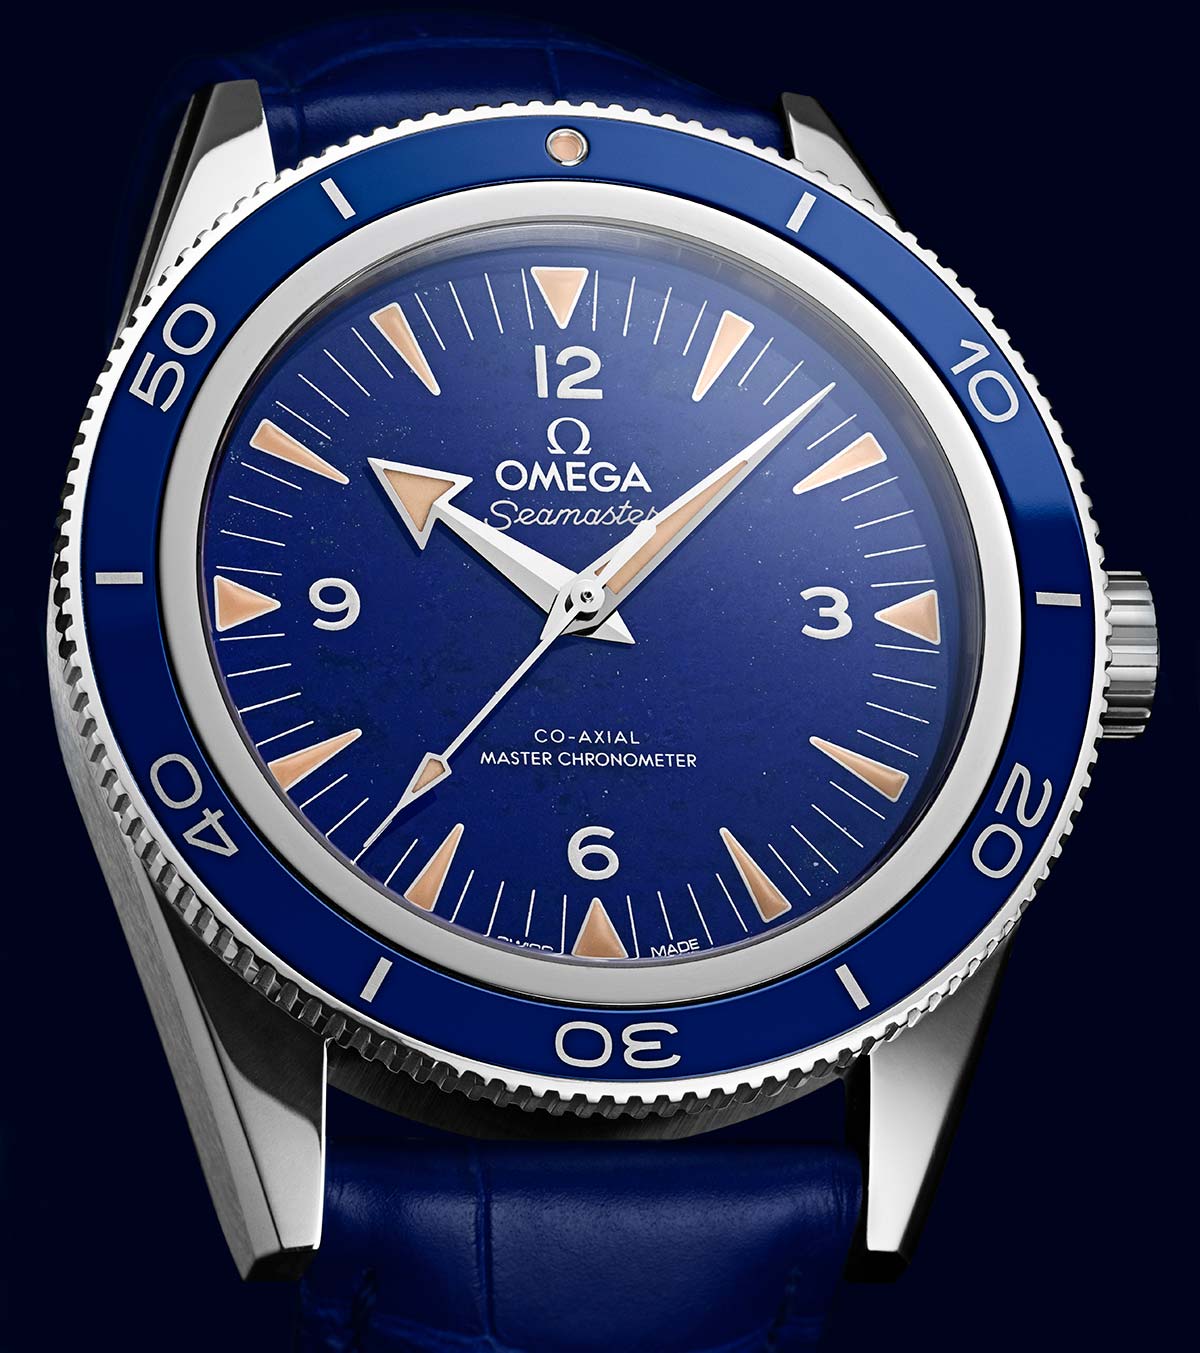 Omega - Seamaster 300 Lapis Lazuli Dial | Time and Watches ...